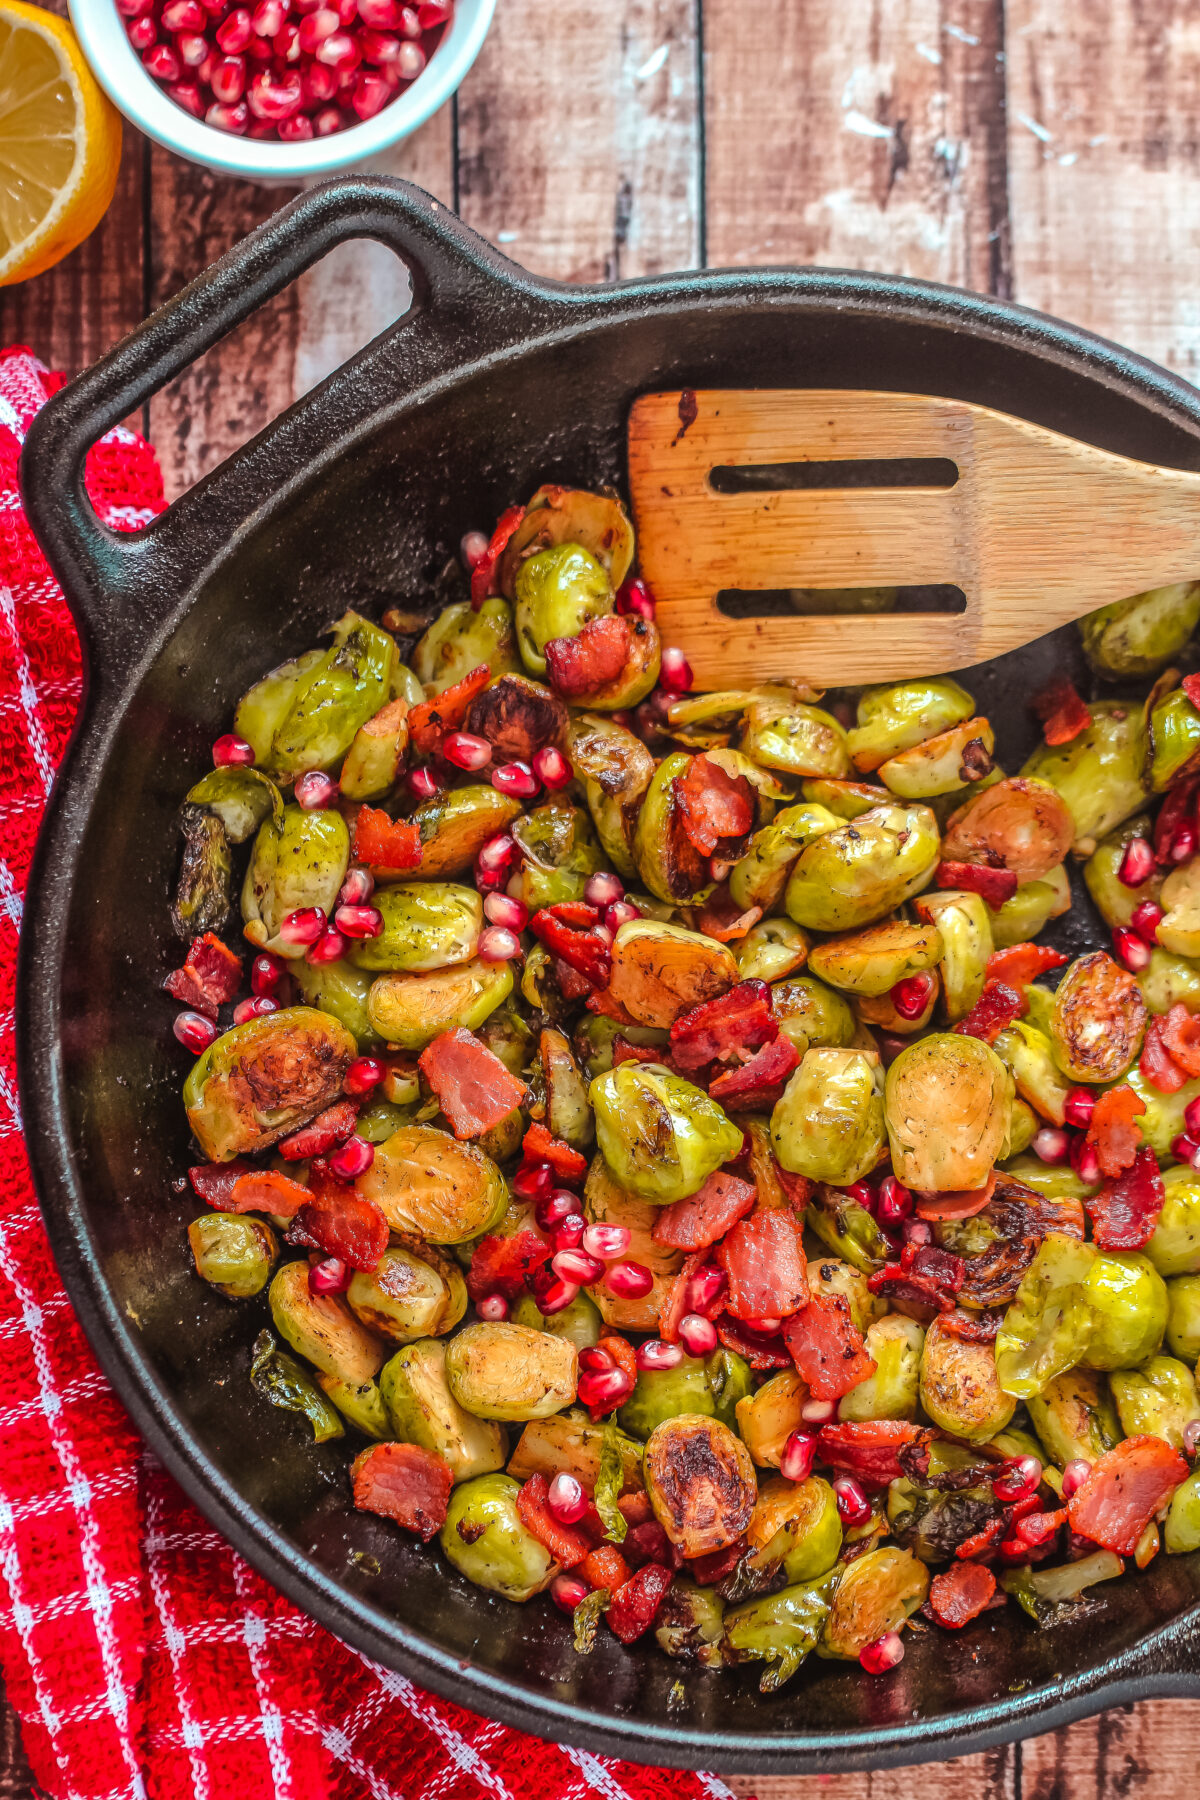 Looking for a festive new side dish? This bacon roasted brussels sprouts recipe is sweet, savory, delicious and perfect for the holidays.